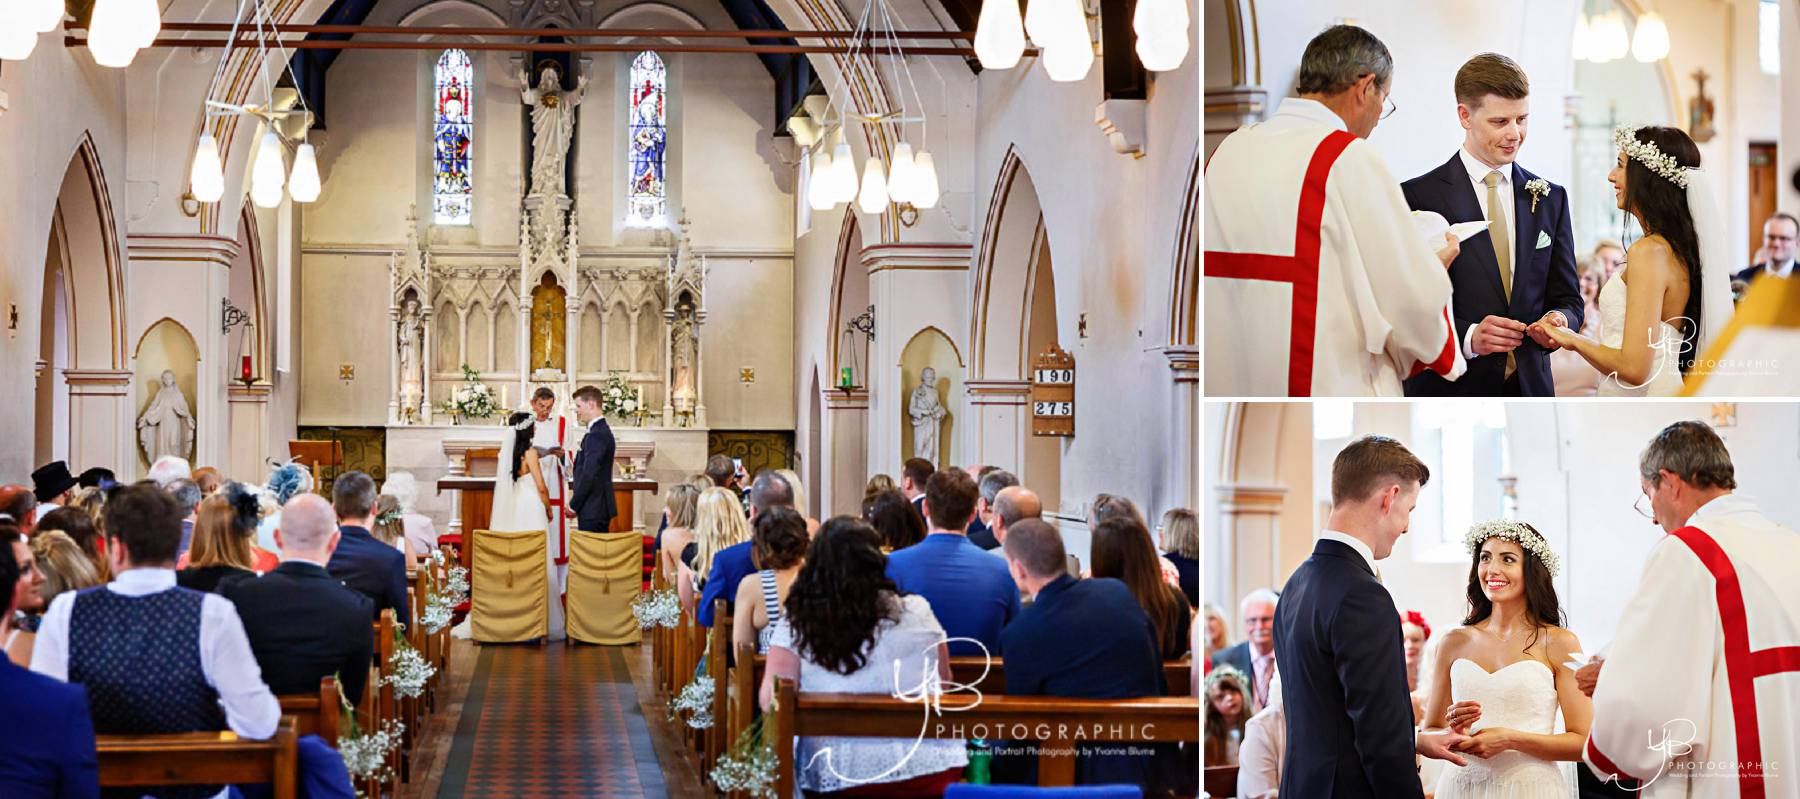 Wedding ceremony in Whitstable - photography by YBPHOTOGRAPHIC